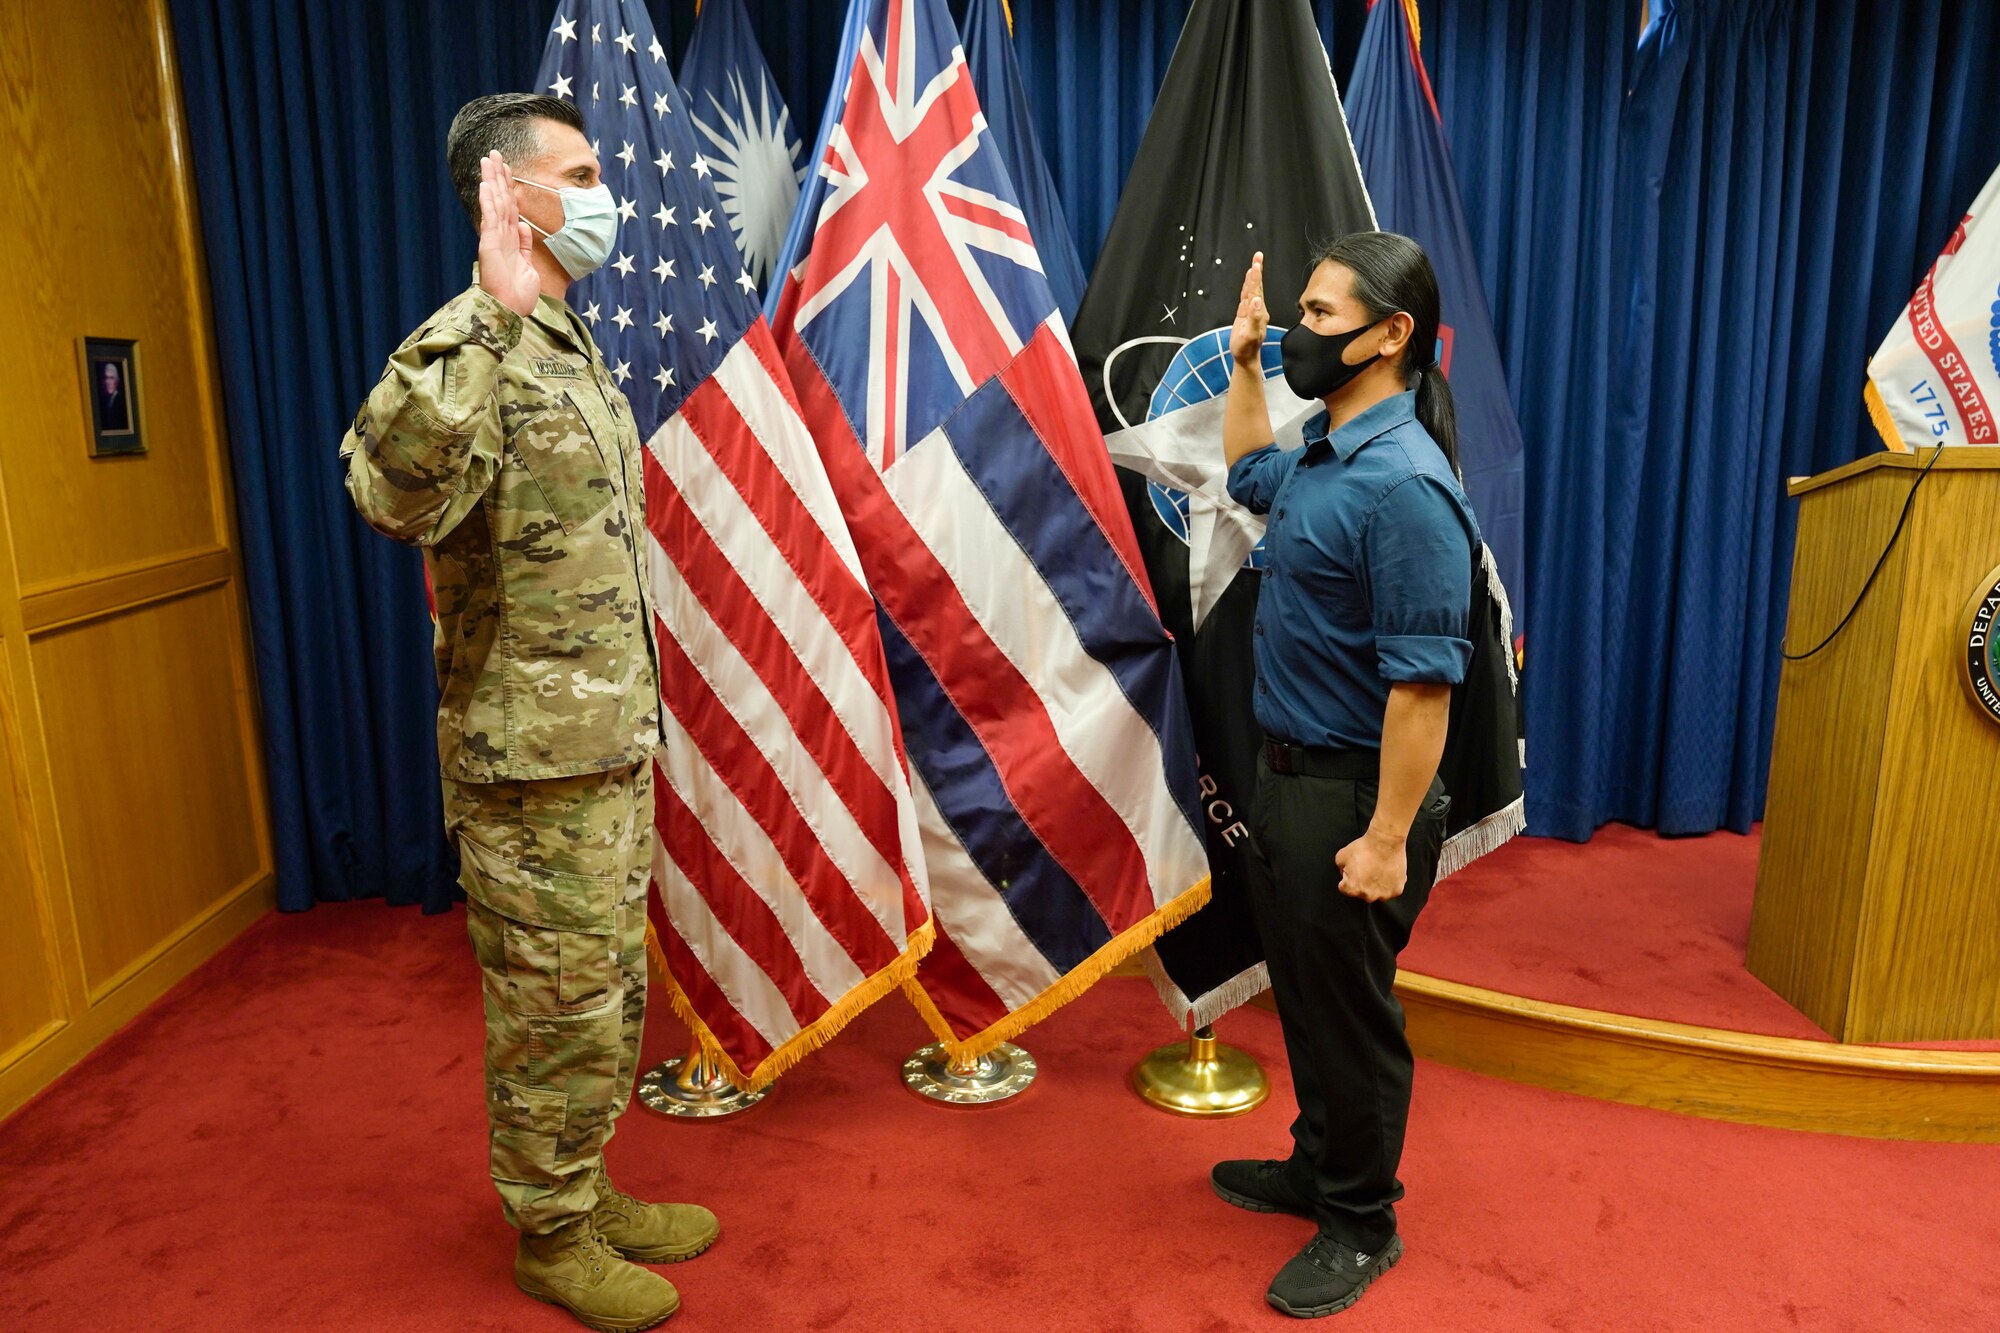 Reyjie Cliff Blando Madriaga, a Hawaiian native, receives the oath of enlistment from U.S. Army Capt. Donald McCoullough, Honolulu Military Entrance Processing Station Officer, as the first Hawaiian U.S. Space Force at Joint Base Pearl Harbor-Hickam, Hawaii, March 4, 2021. The oath of enlistment is a promise made by members of the United States Armed Forces to support and defend the Constitution. (U.S. Air Force photo by Airman 1st Class Makensie Cooper)